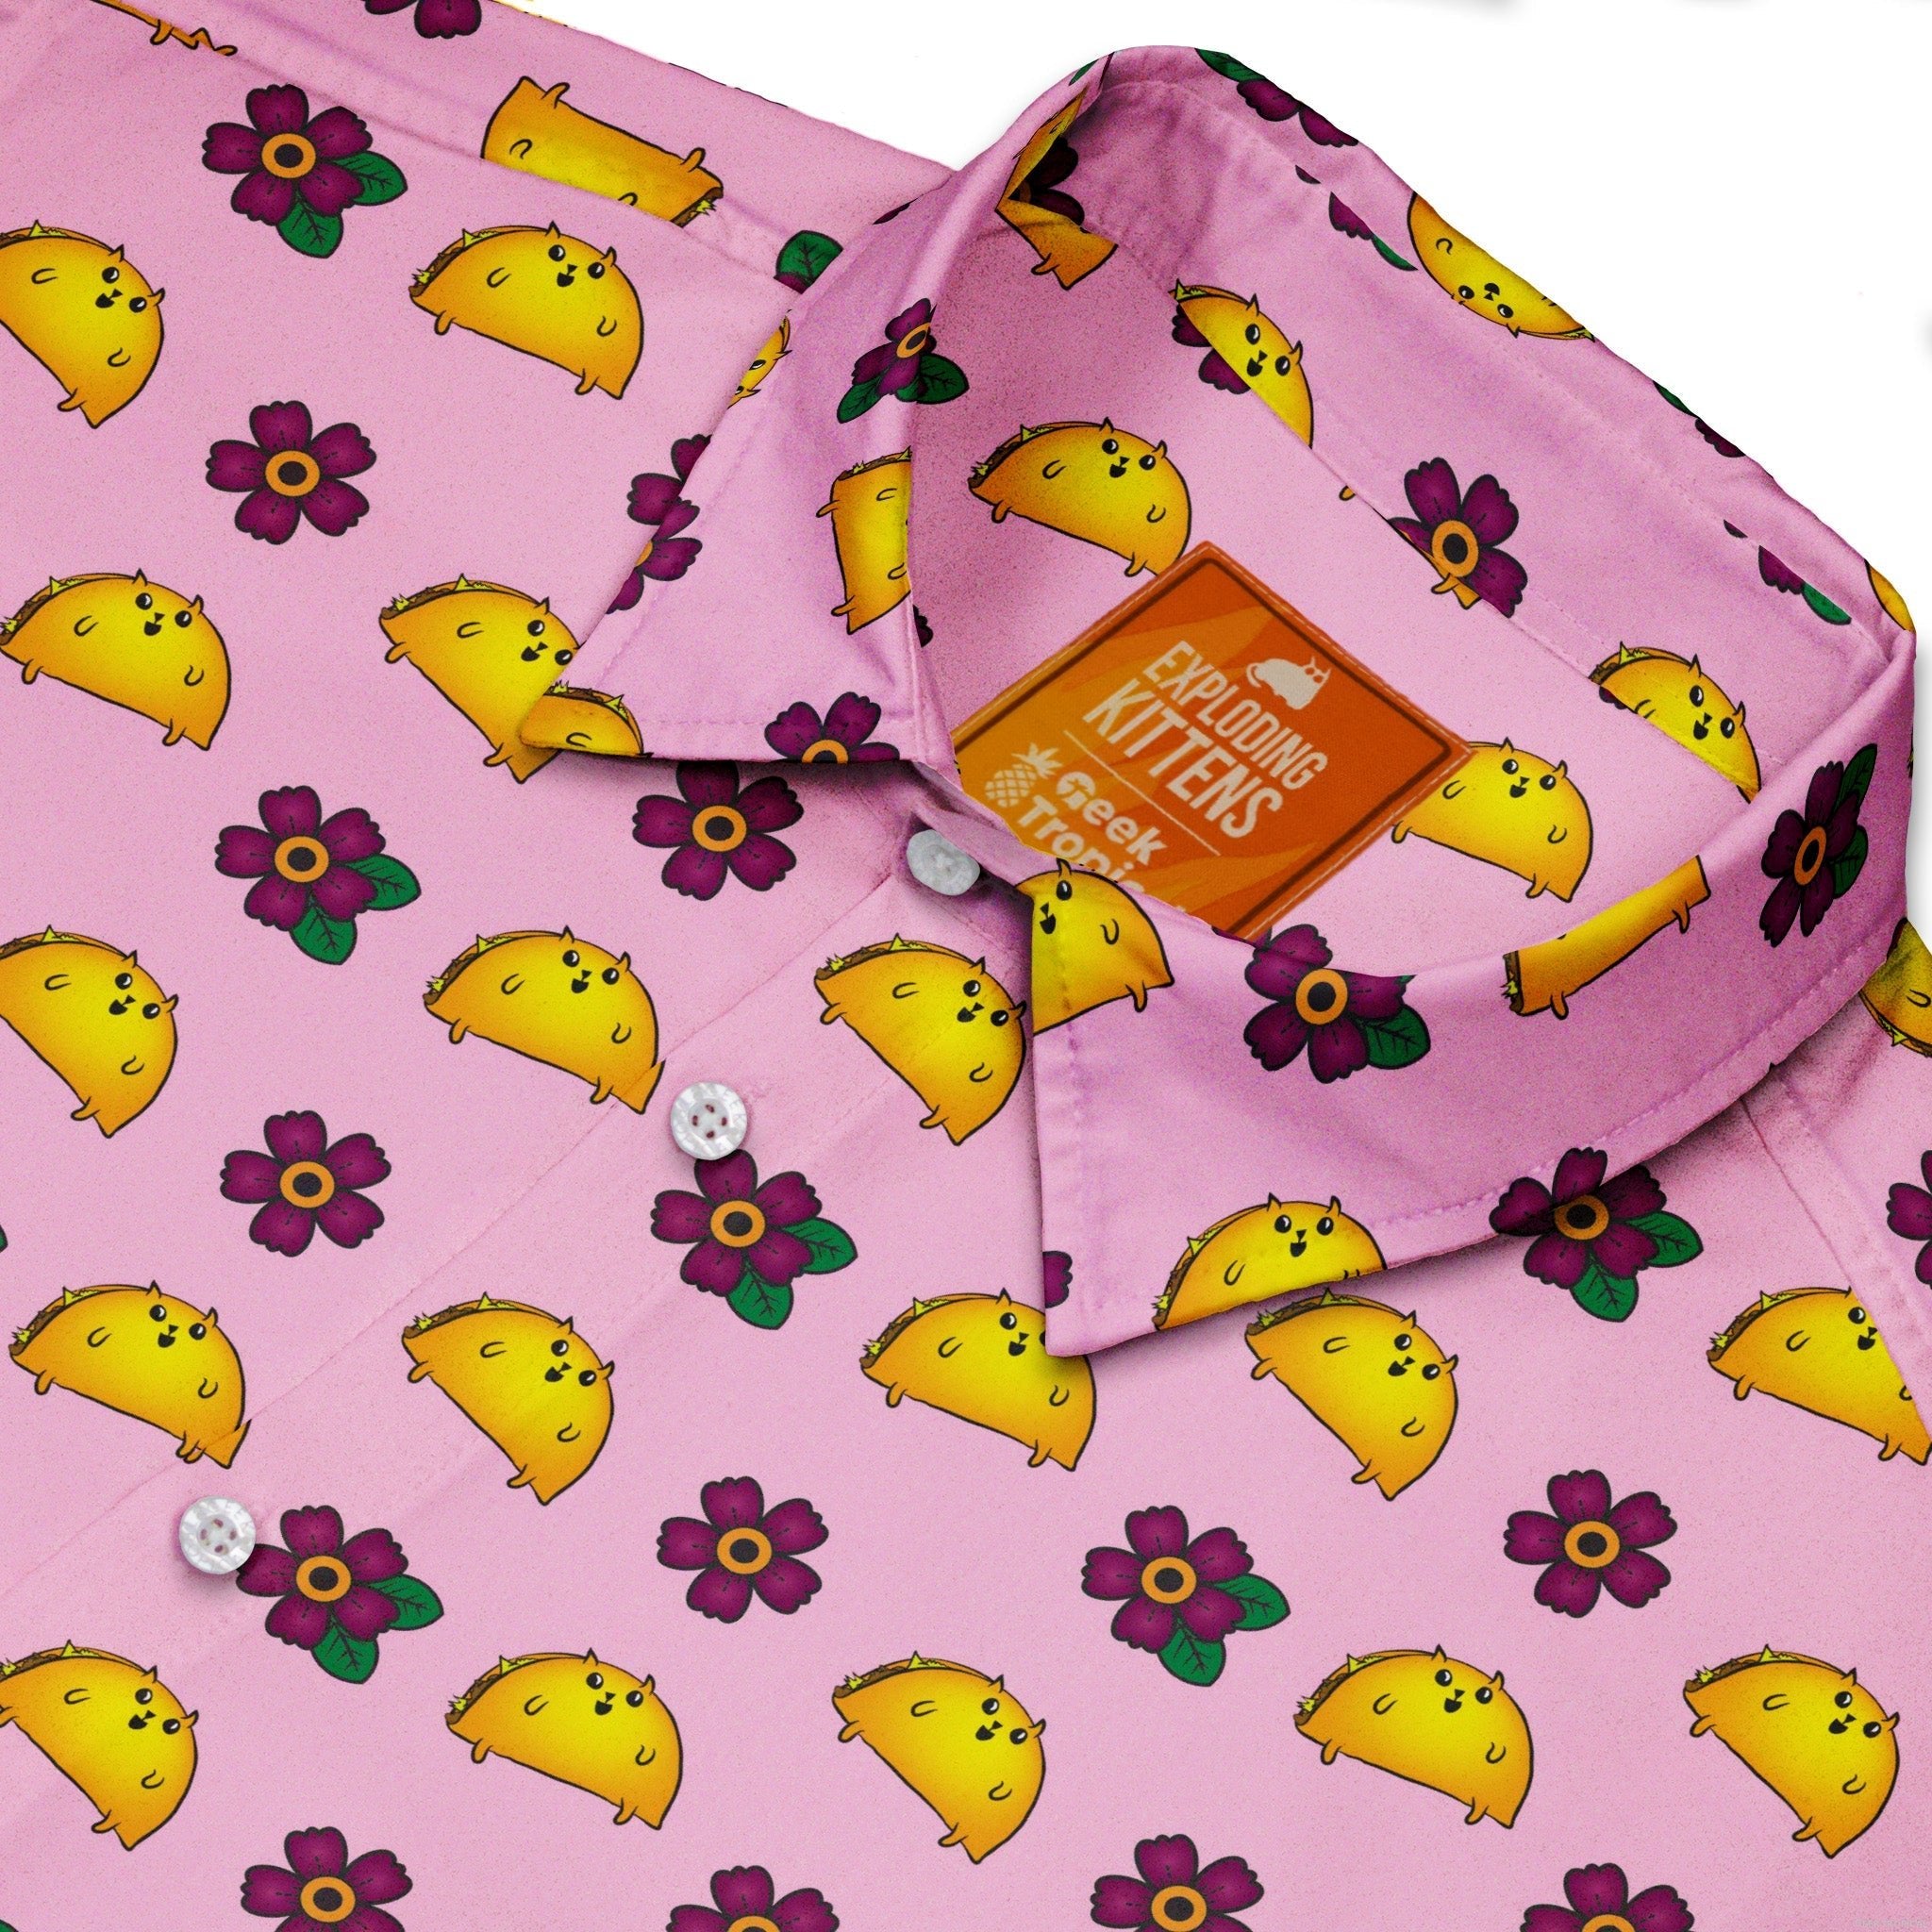 Exploding Kittens TacoCat Flowers Button Up Shirt - adult sizing - Animal Patterns - board game print